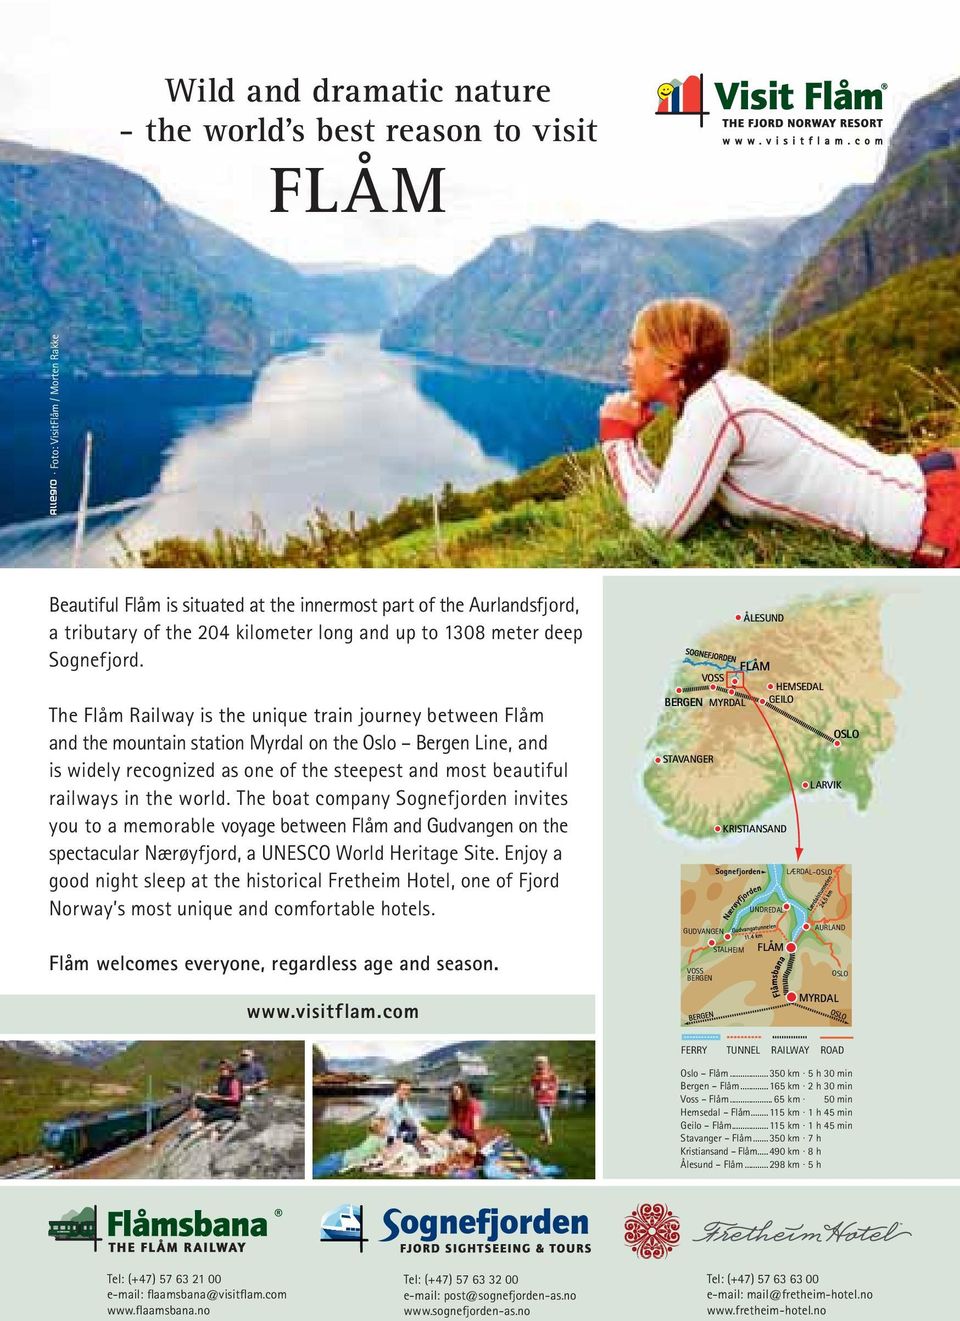 The Flåm Railway is the unique train journey between Flåm and the mountain station Myrdal on the Oslo Bergen Line, and is widely recognized as one of the steepest and most beautiful railways in the